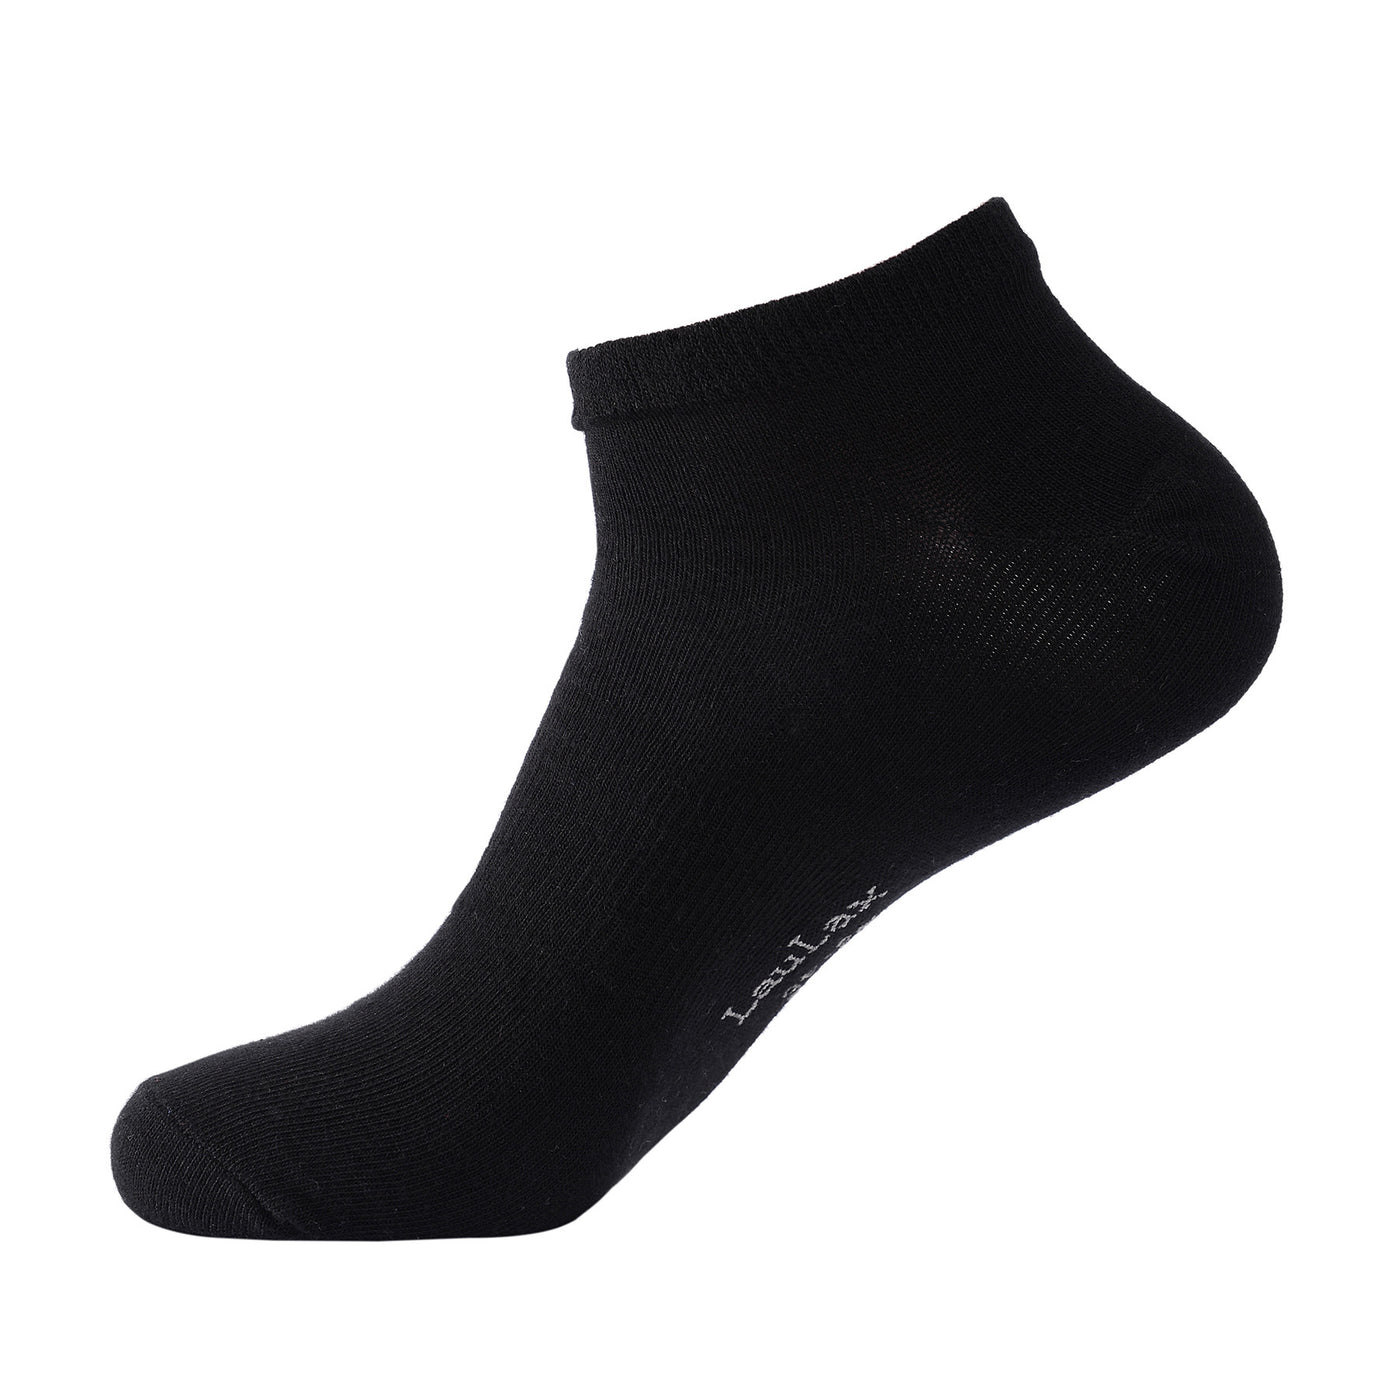 Laulax 6 Pairs Finest Combed Cotton Arch Support Trainer Socks, Black, Size UK 9 - 11 / Europ 43 - 46